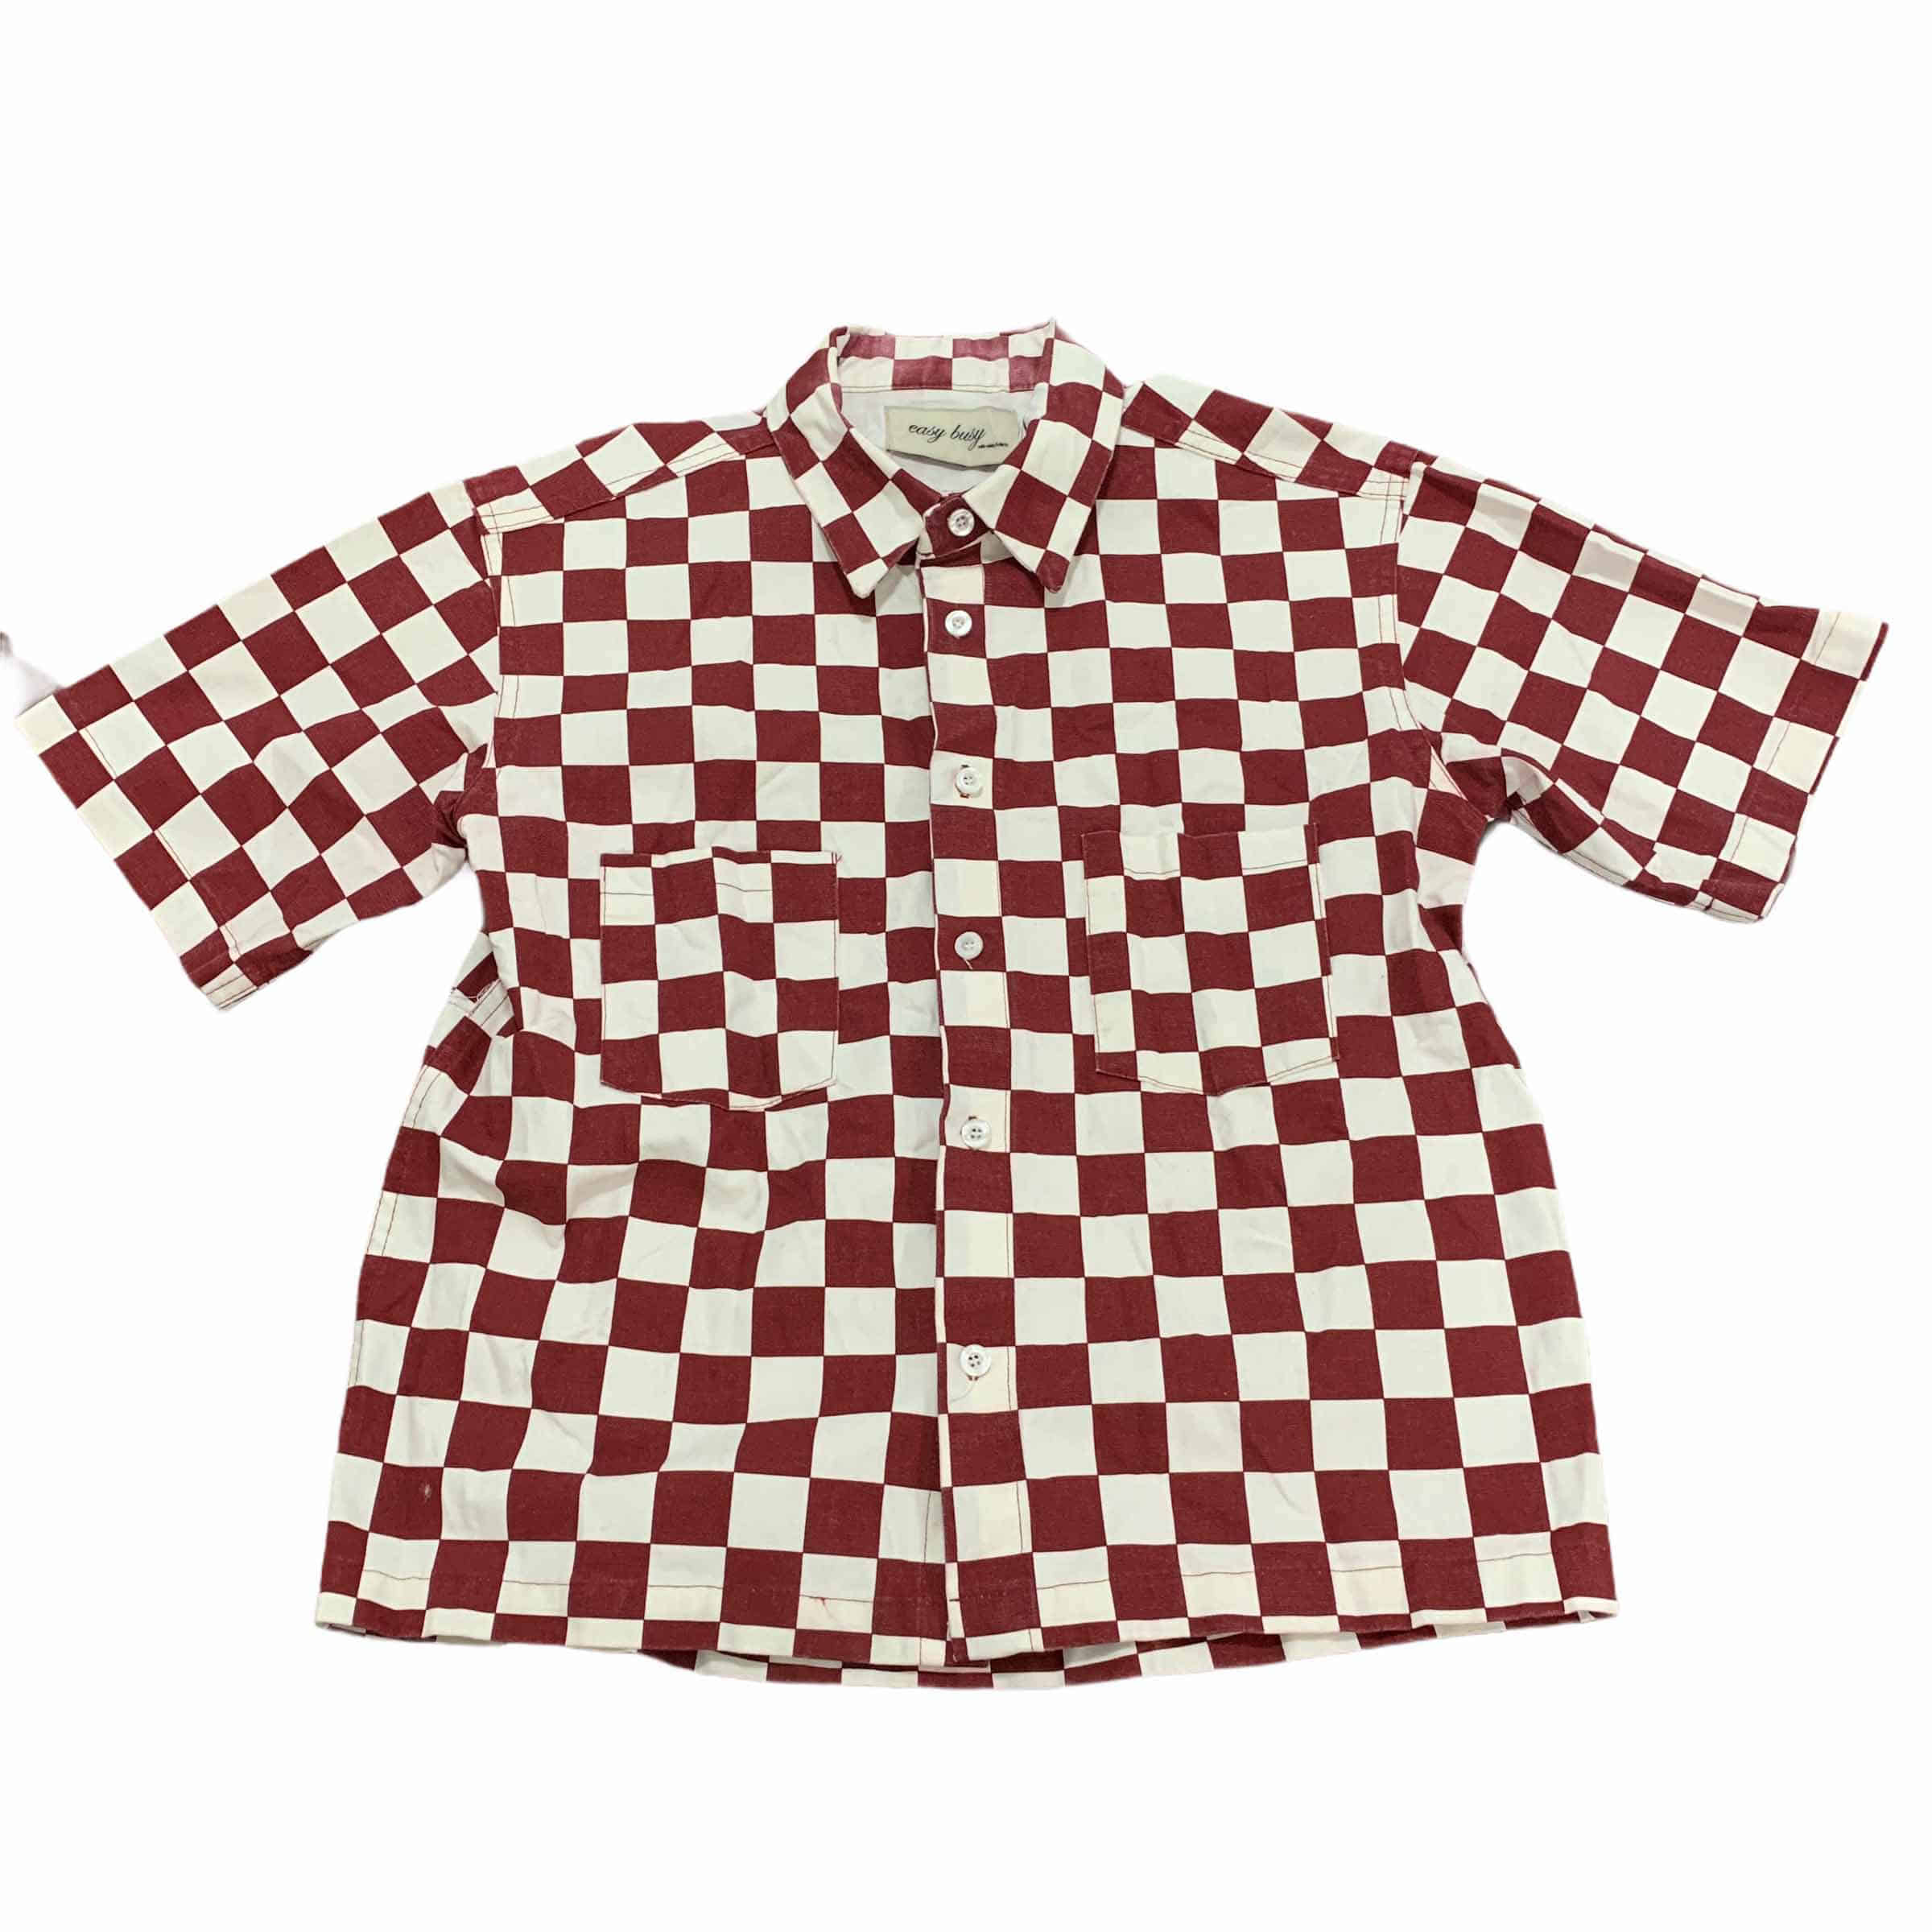 [Easy busy] Red checkerboard short sleeve shirt - Size M